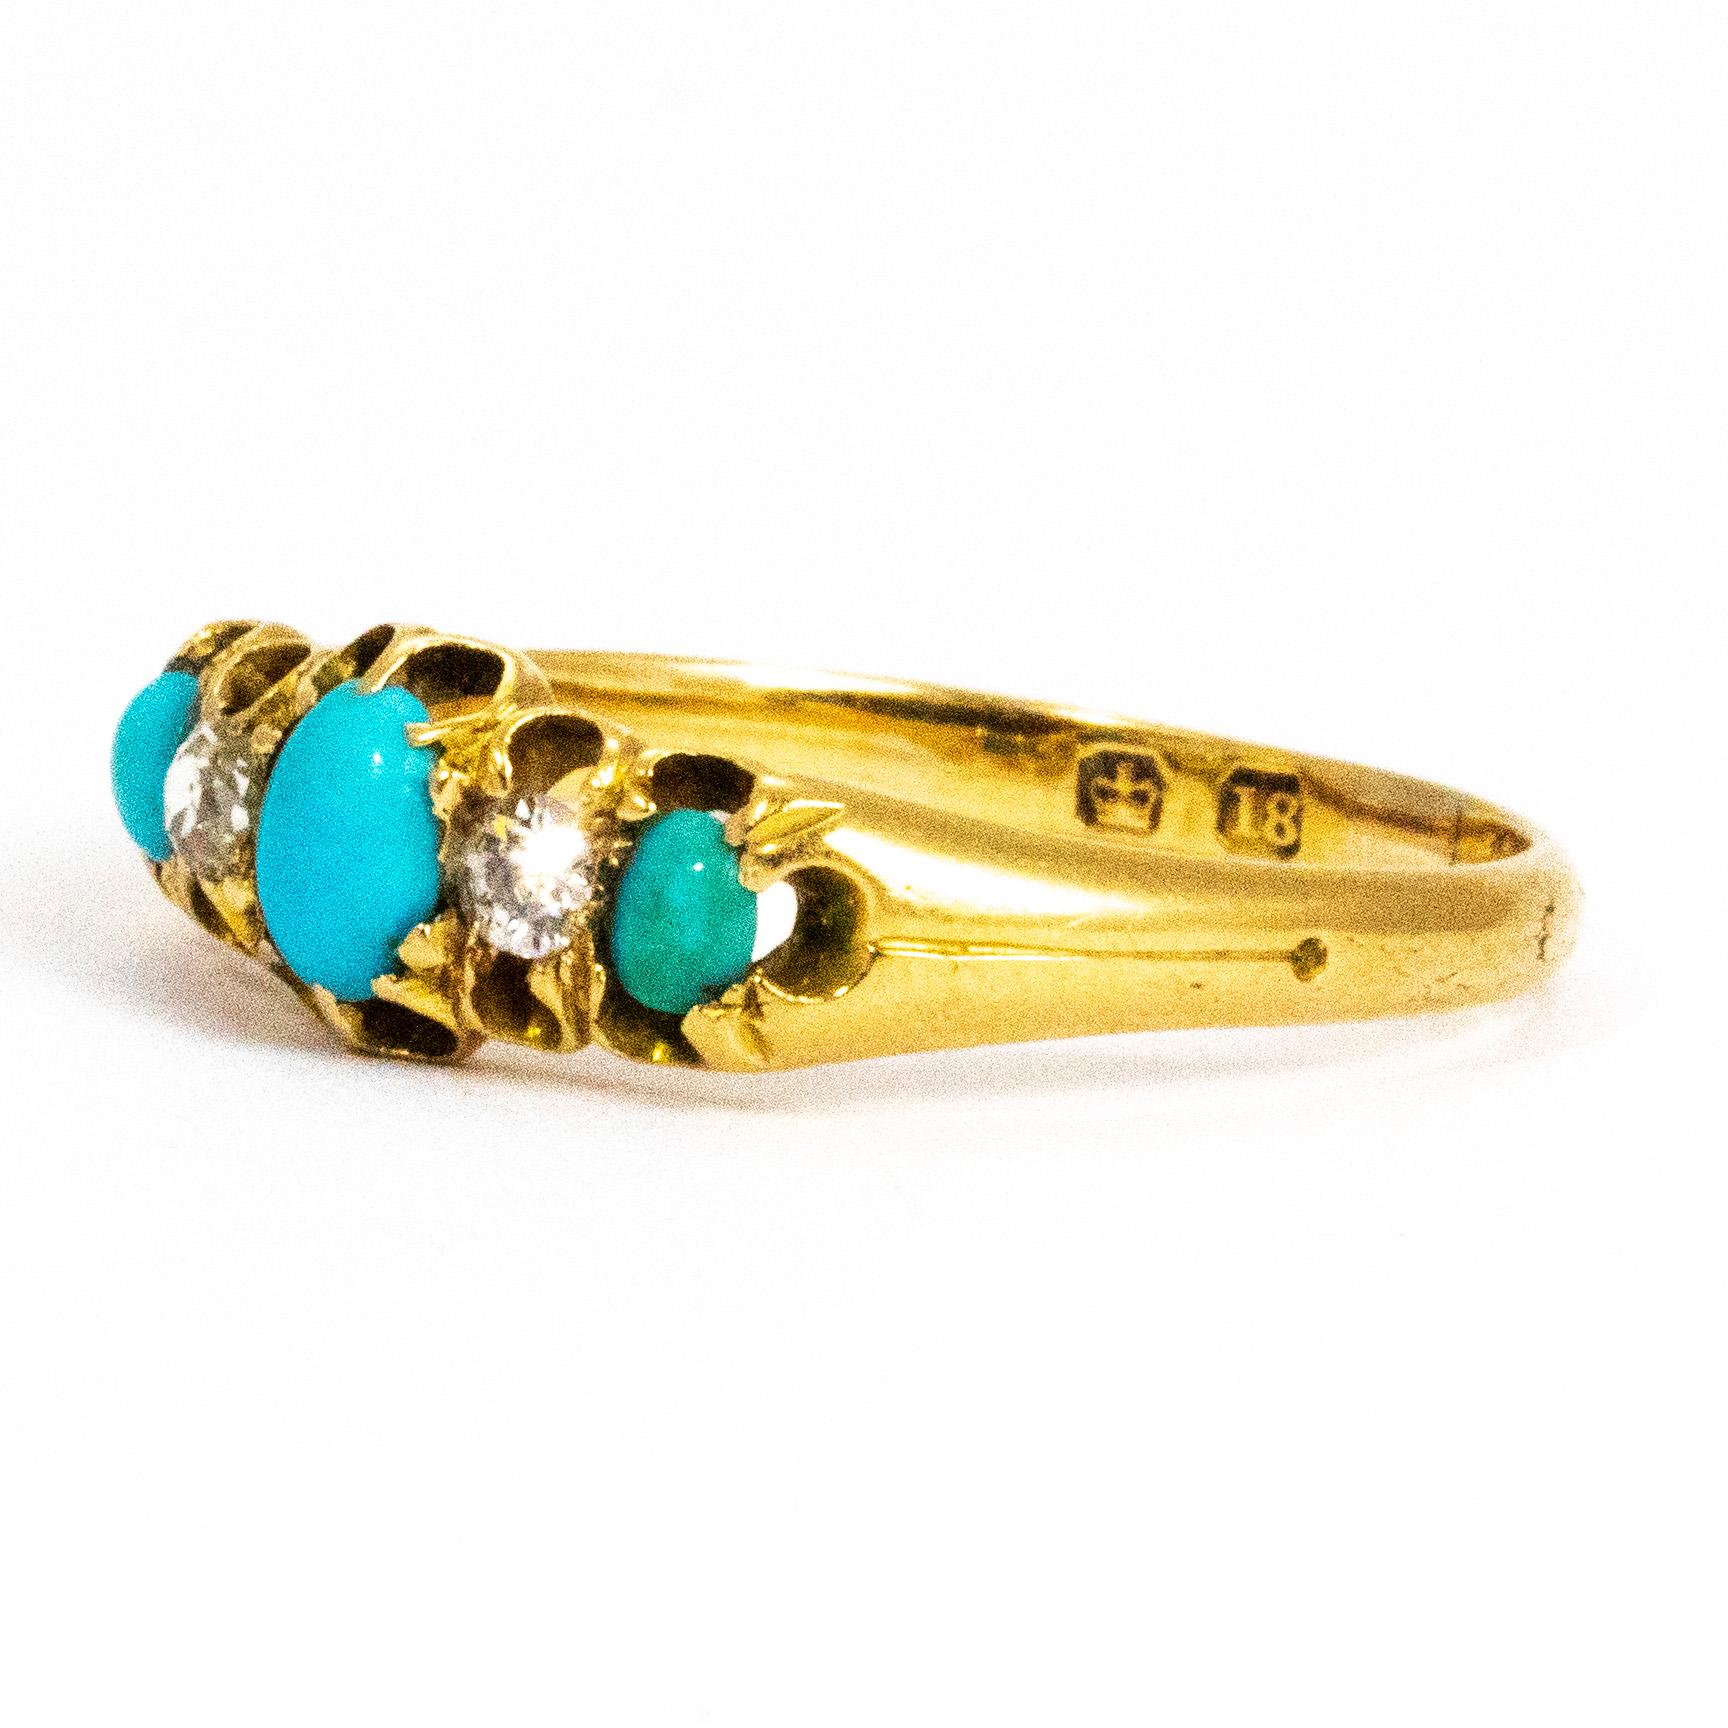 This gorgeous victorian three stone holds a trio of oval bright blue turquoise stones and in between them sit a bright, round sparkling diamond. The stones are enclosed in curls of bright 18ct yellow gold which then carried down with engraved line